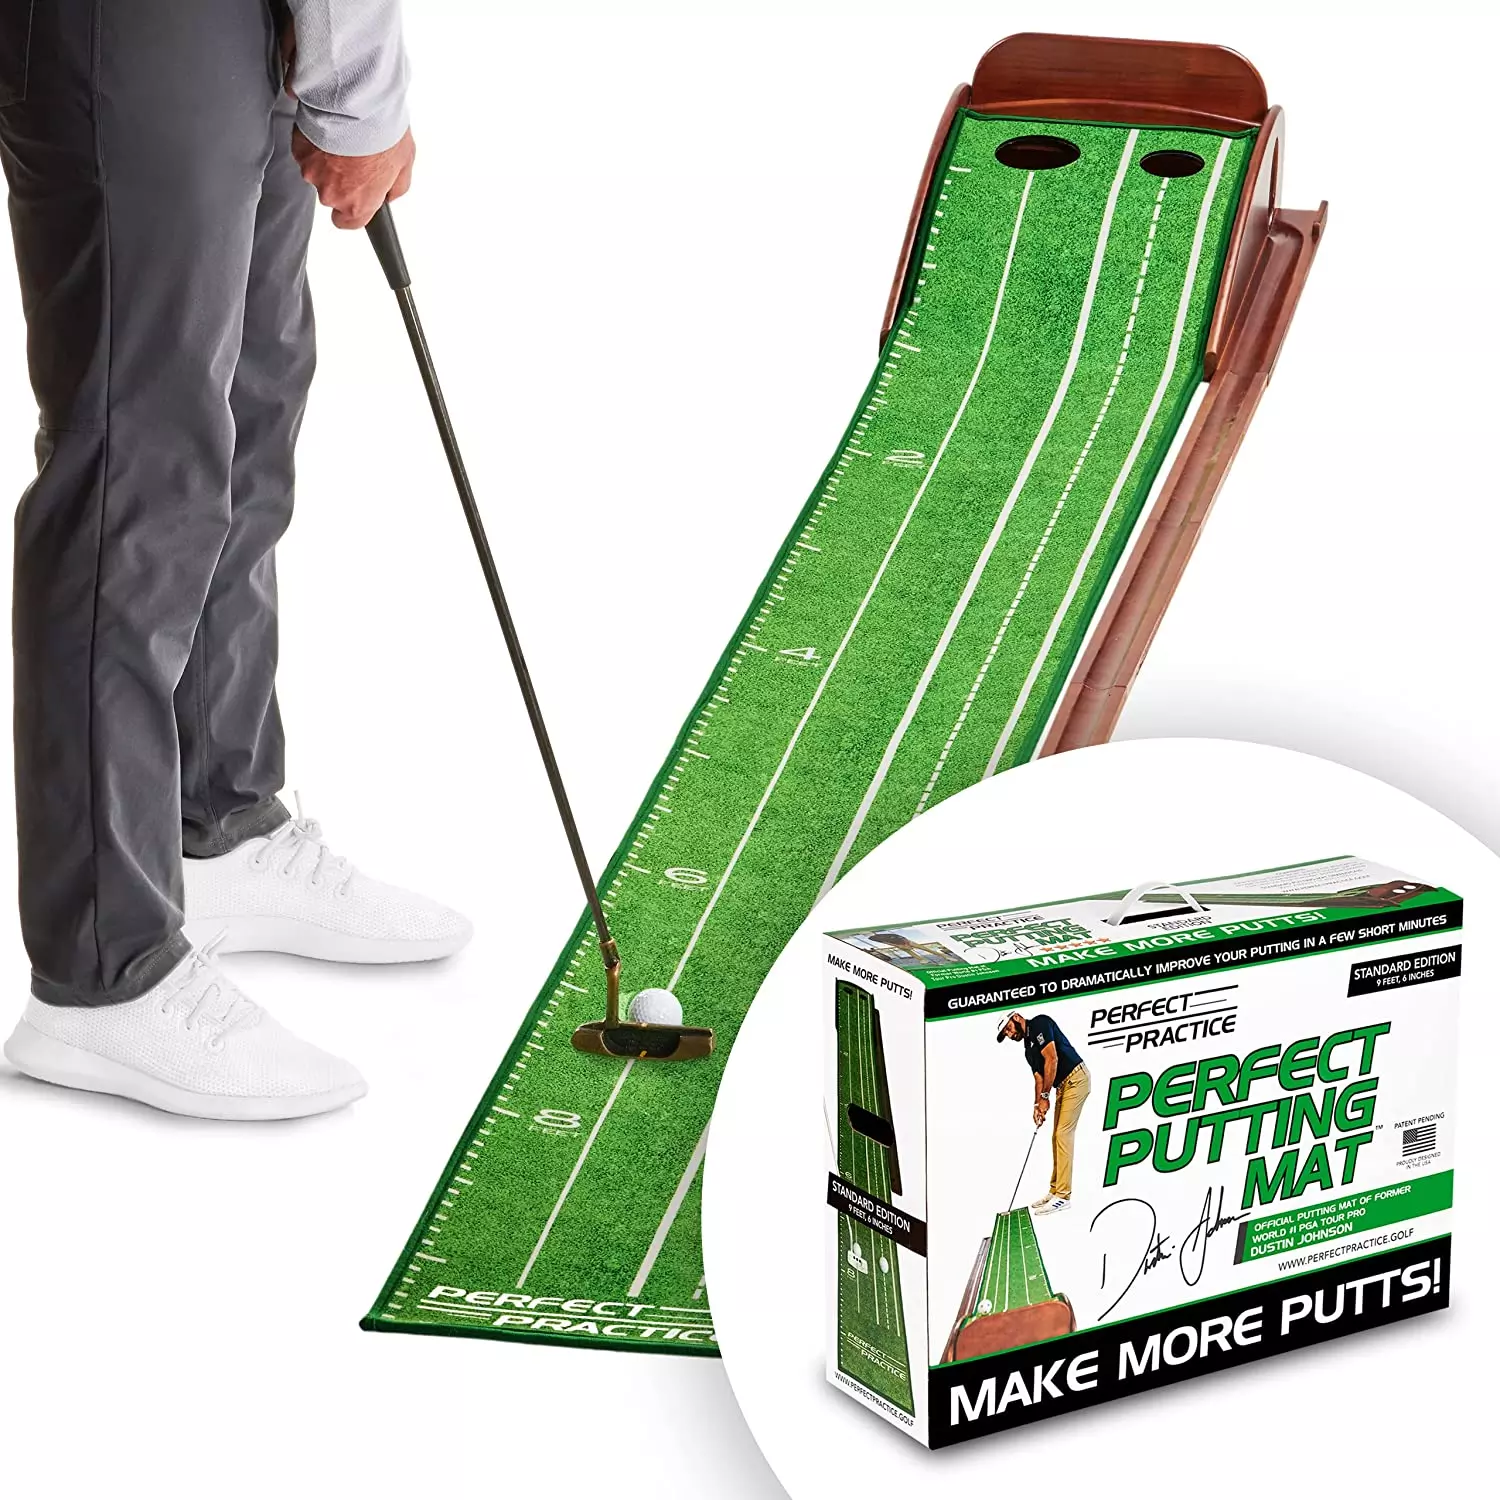 Perfect Putting Mat a great way to practice your golf game while putting indoors